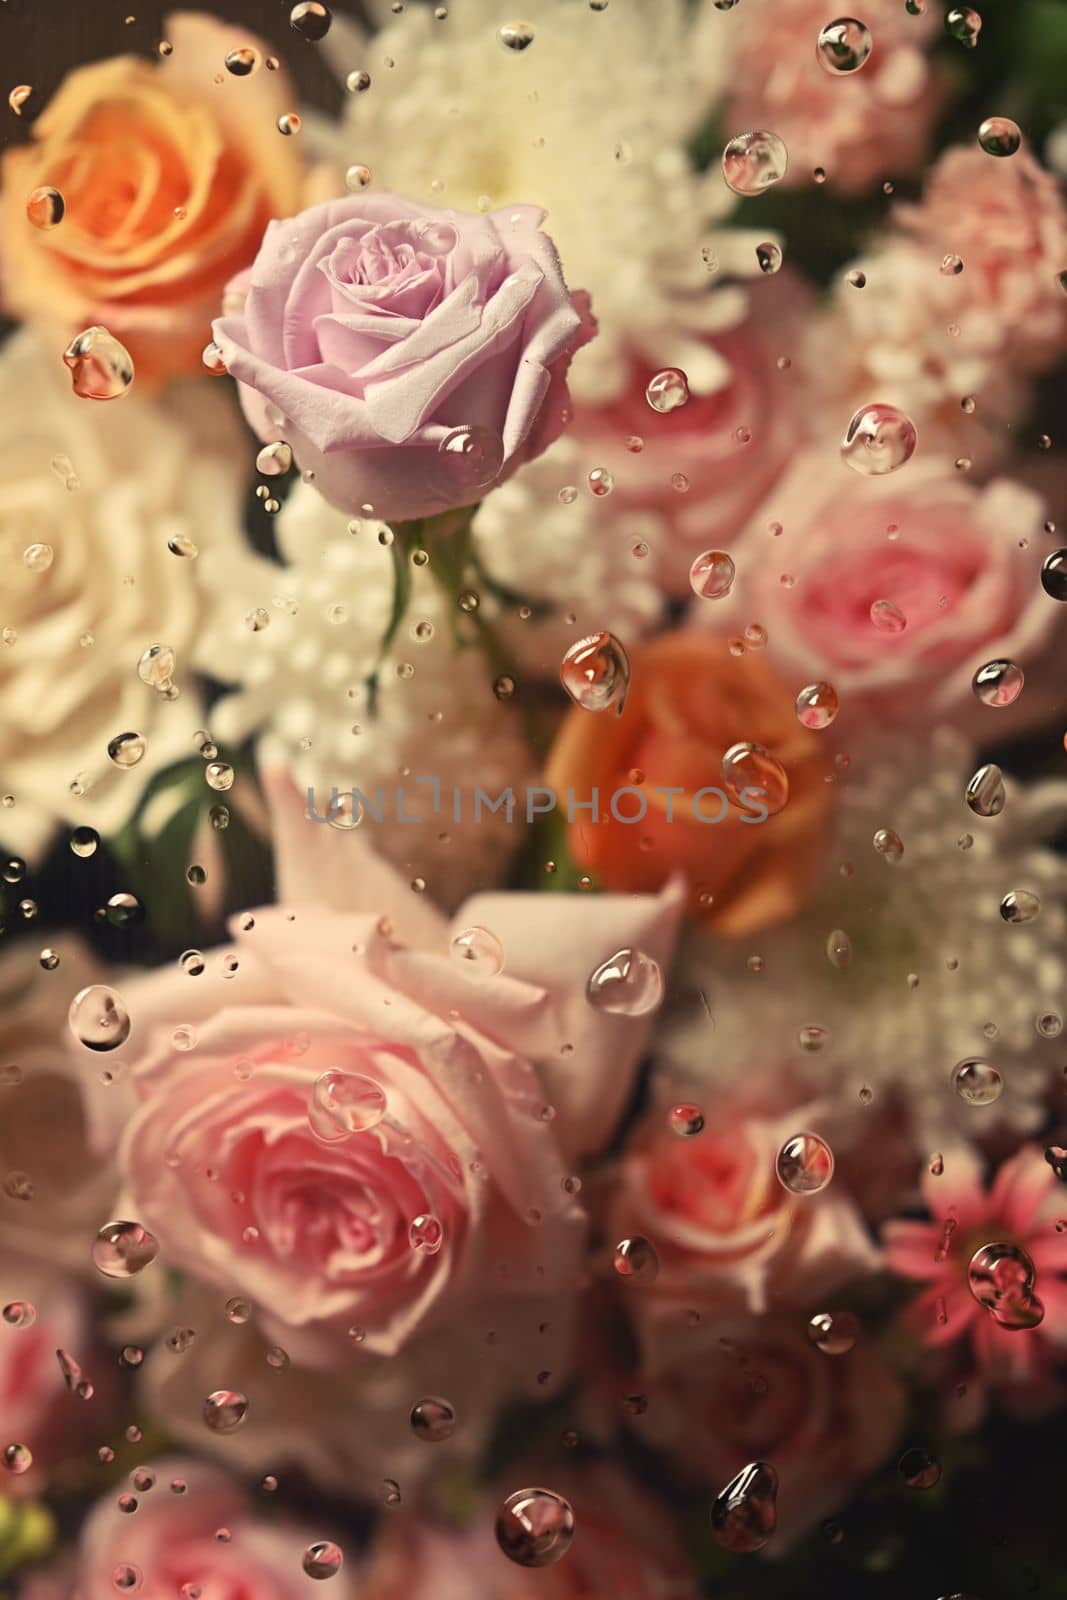 Pink, orange and peach roses under transparent glass with condensation drops texture. Floral botanical wallpaper.